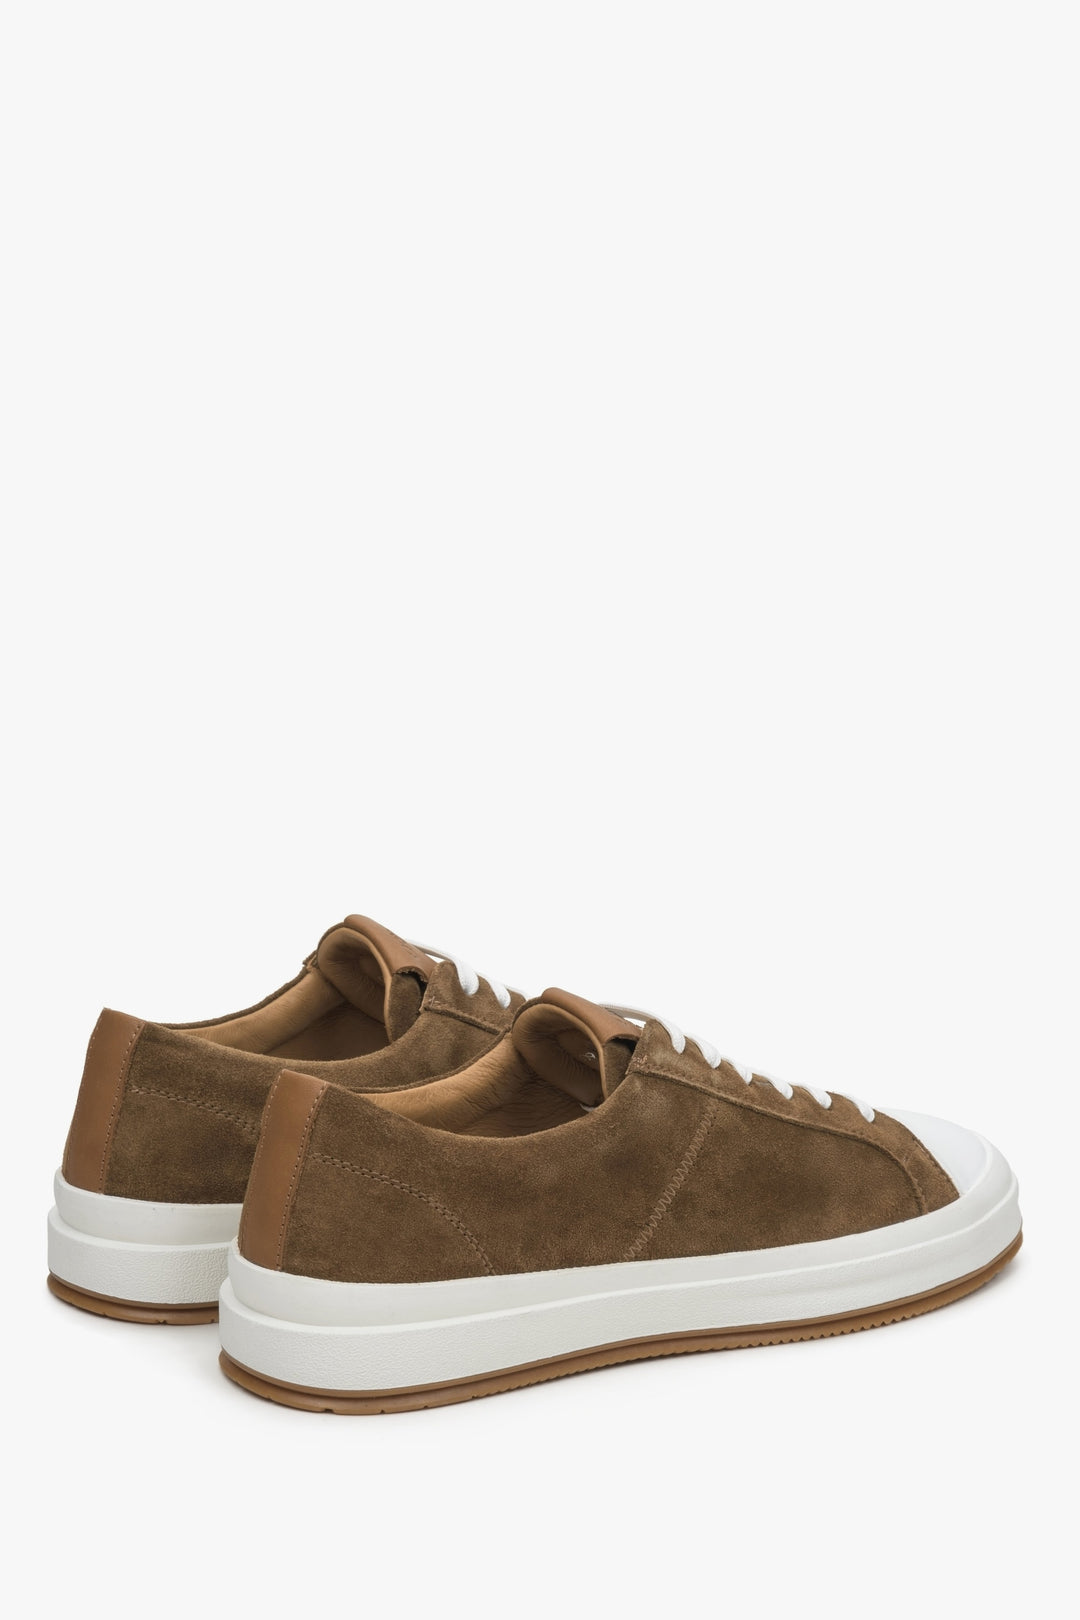 Men's brown sneakers made of genuine velour - close-up on the heel and side line of the shoes.